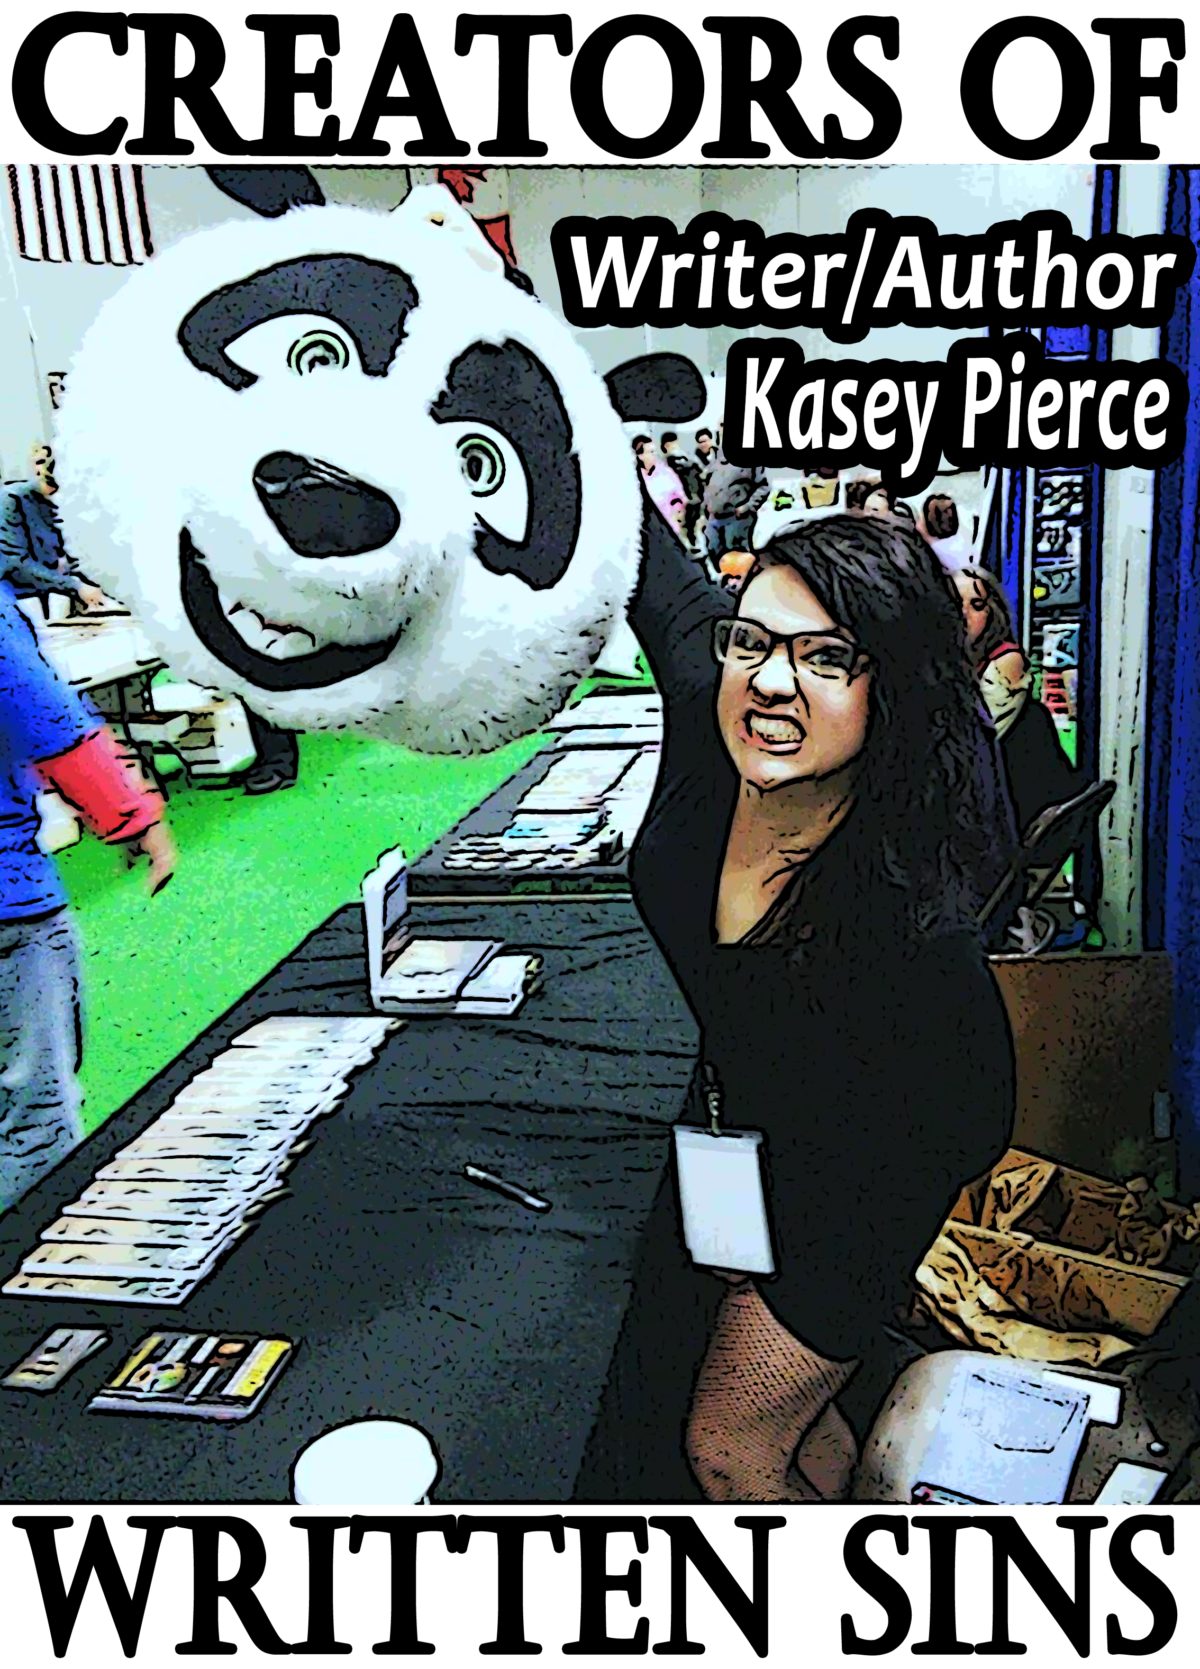 Kosmic Kasey has a Source for you to get all her short Stories